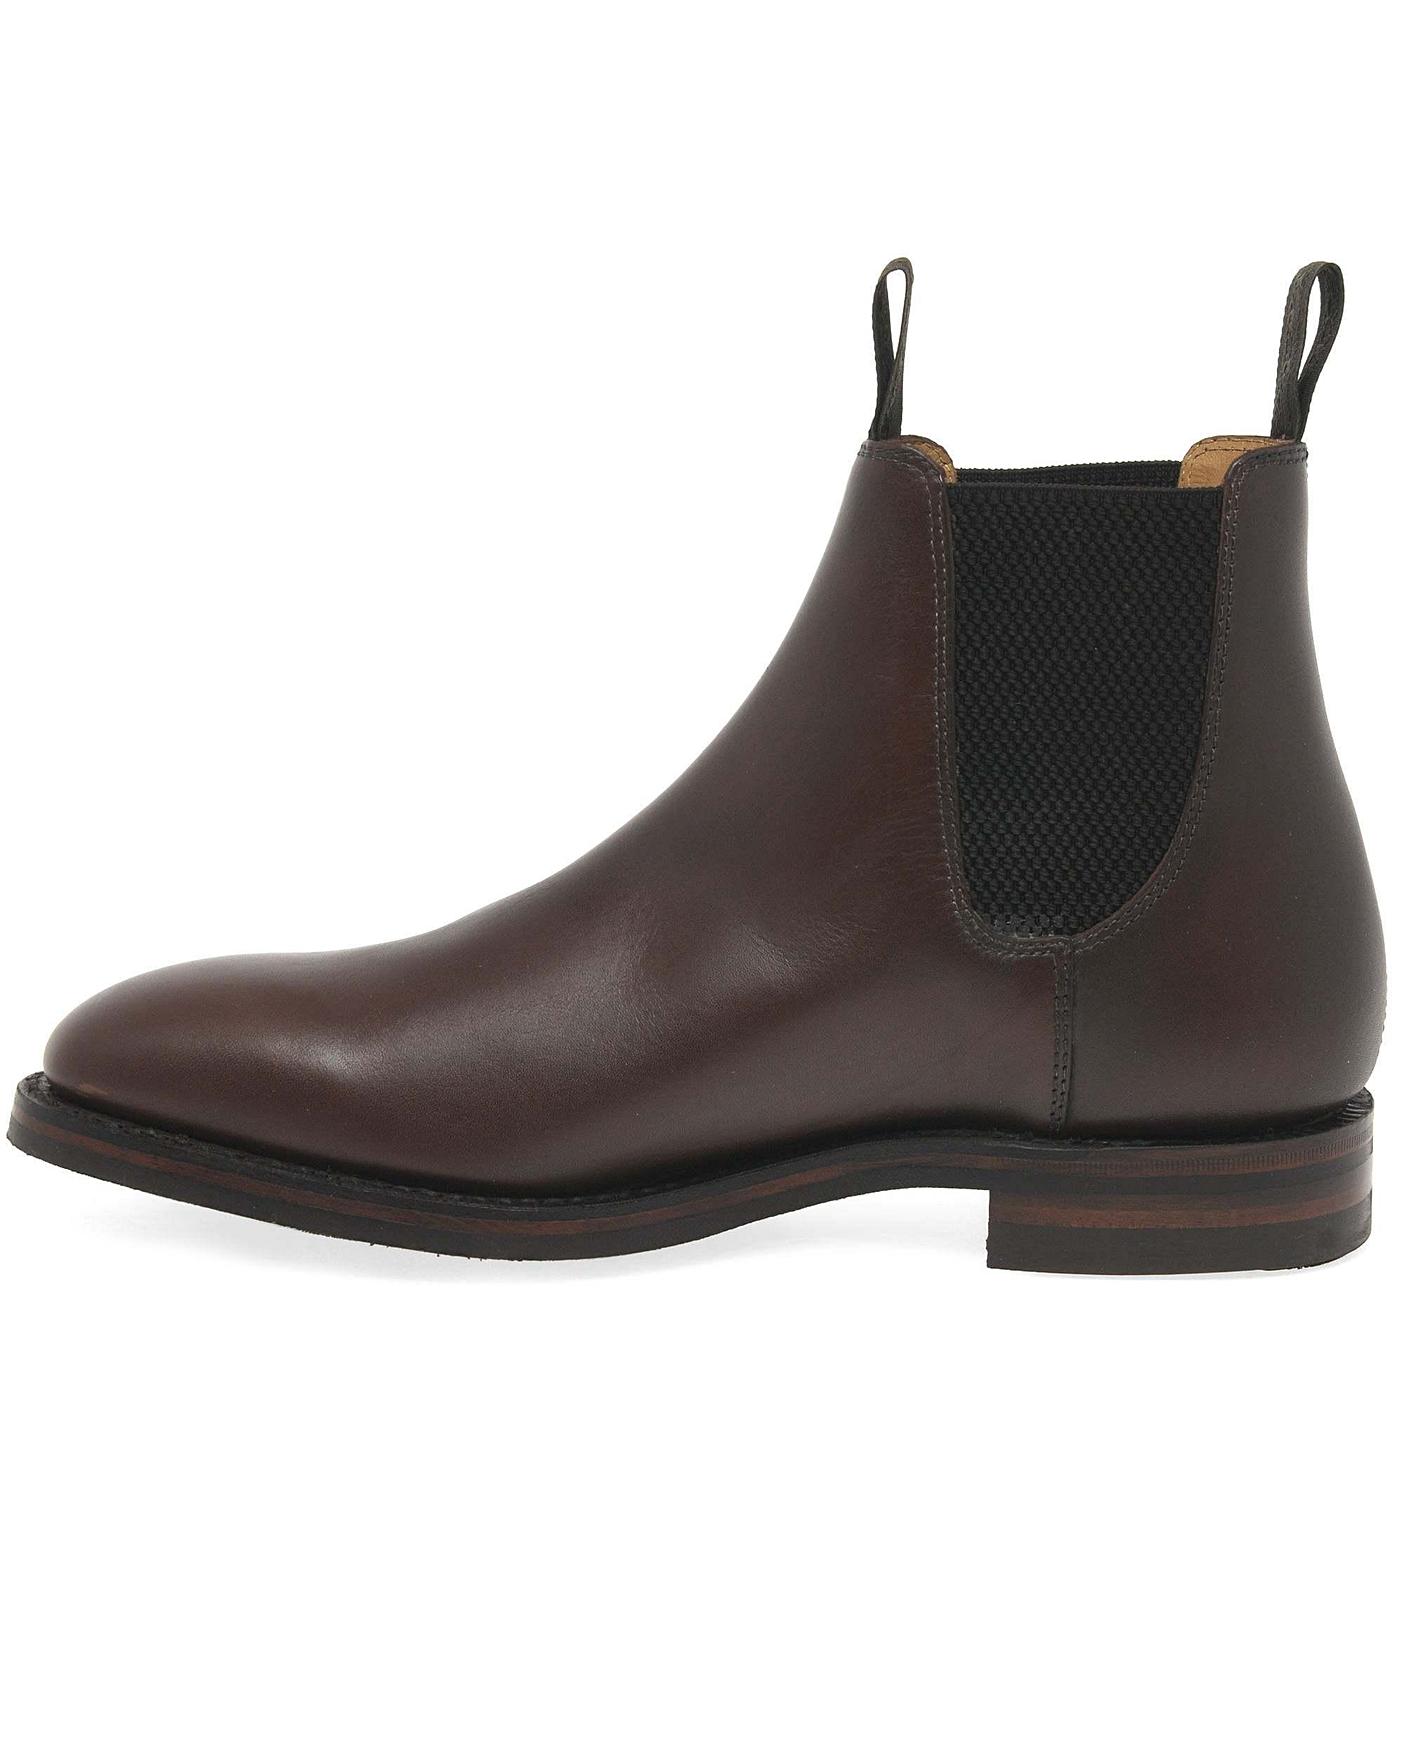 Loake Chatsworth Mens Wide Leather Boots | Jacamo